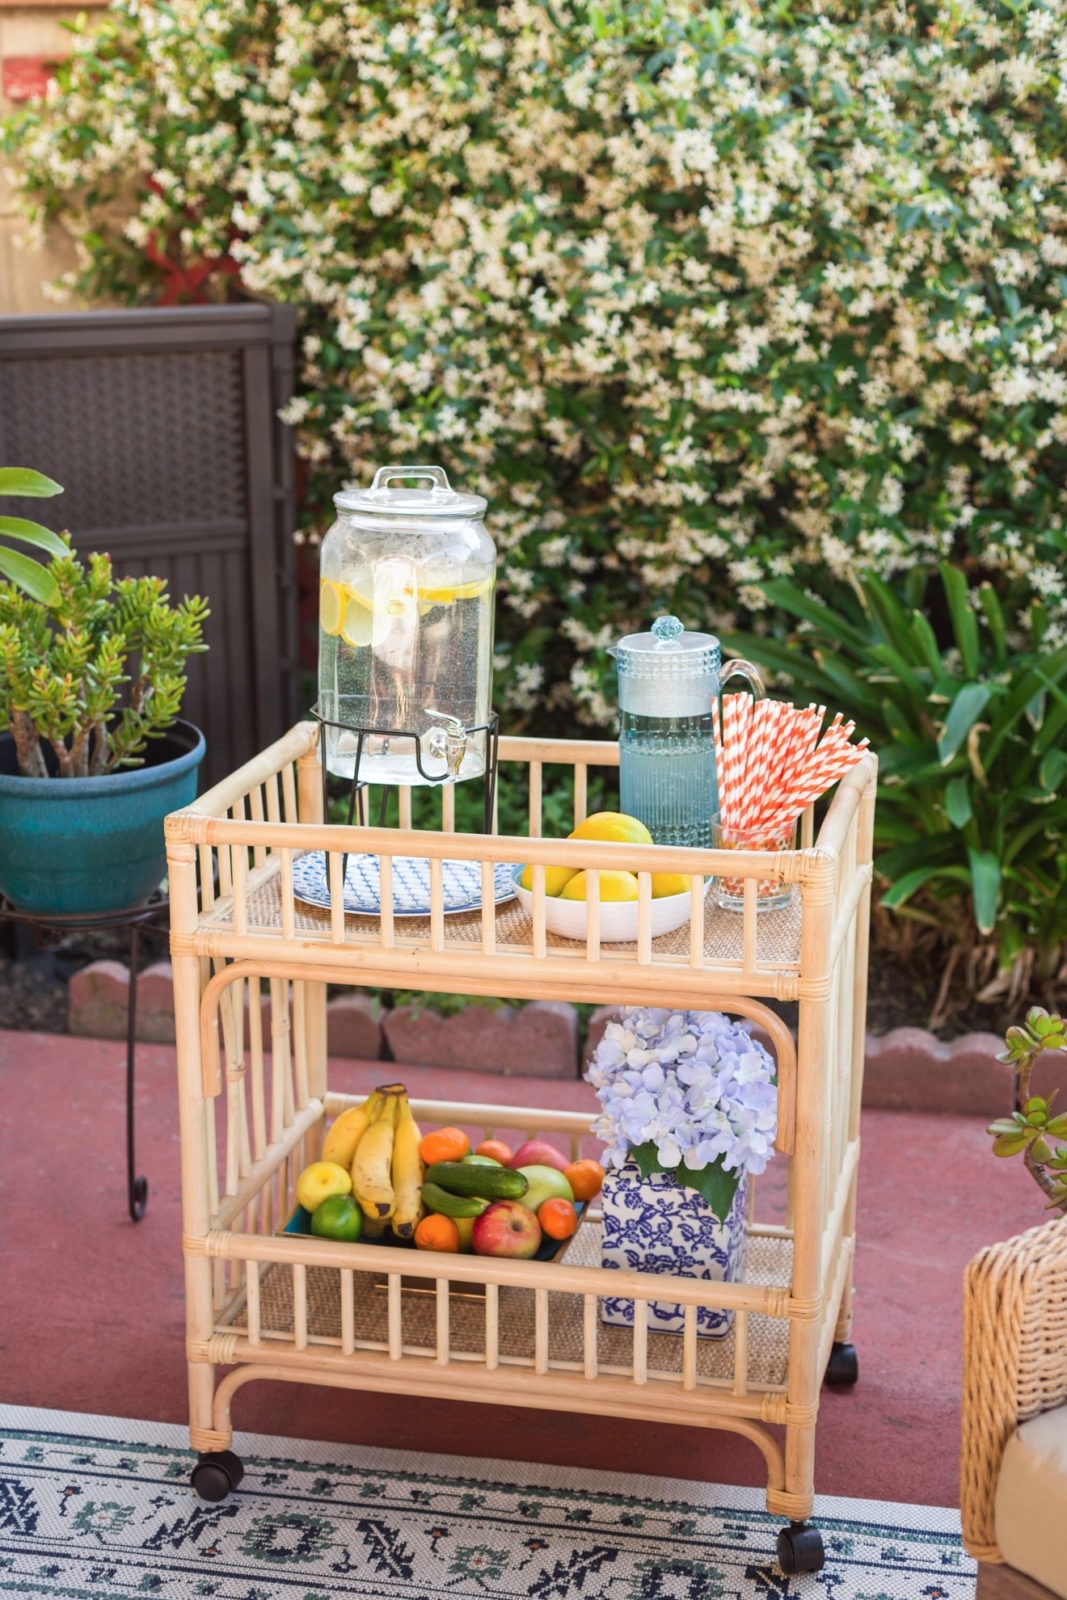 Patio Decor Ideas with Bed Bath & Beyond by Home Decor Blogger Laura Lily, Rattan bar cart,